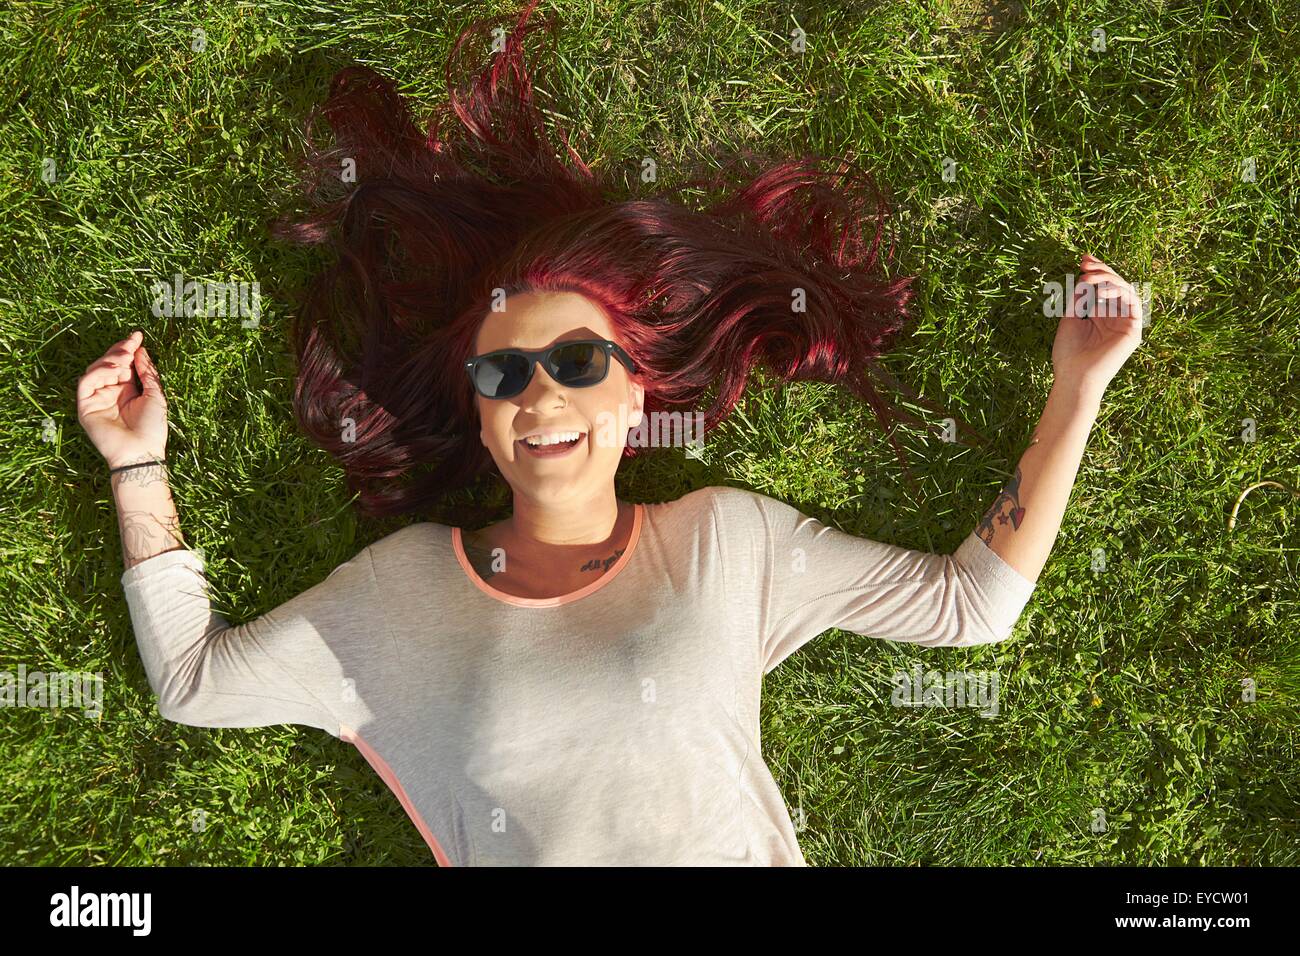 Overhead view of young woman with red hair lying on grass Stock Photo